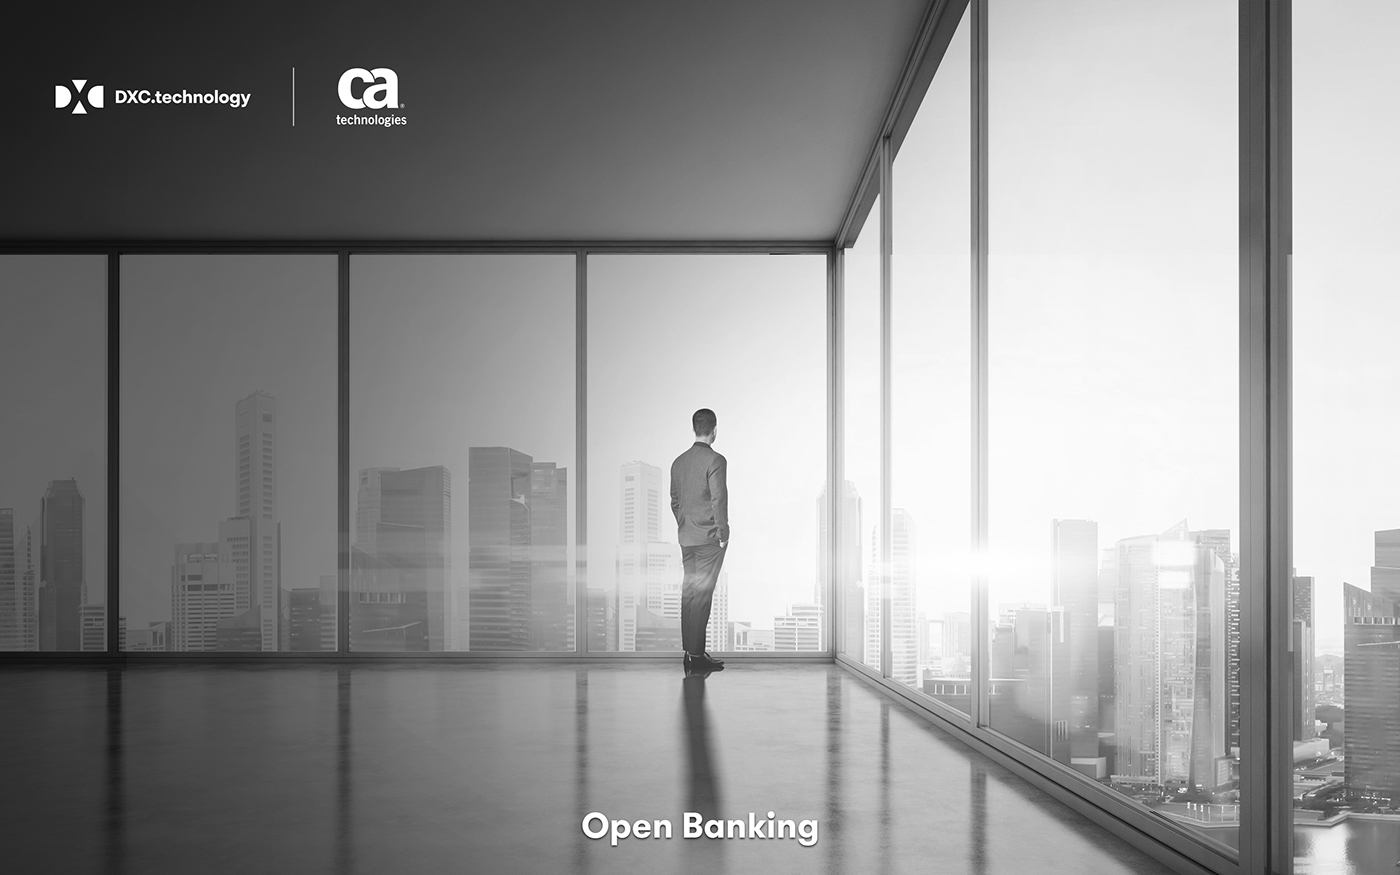 dxc  CA Technology open banking Event tools rollup poster Web branding 